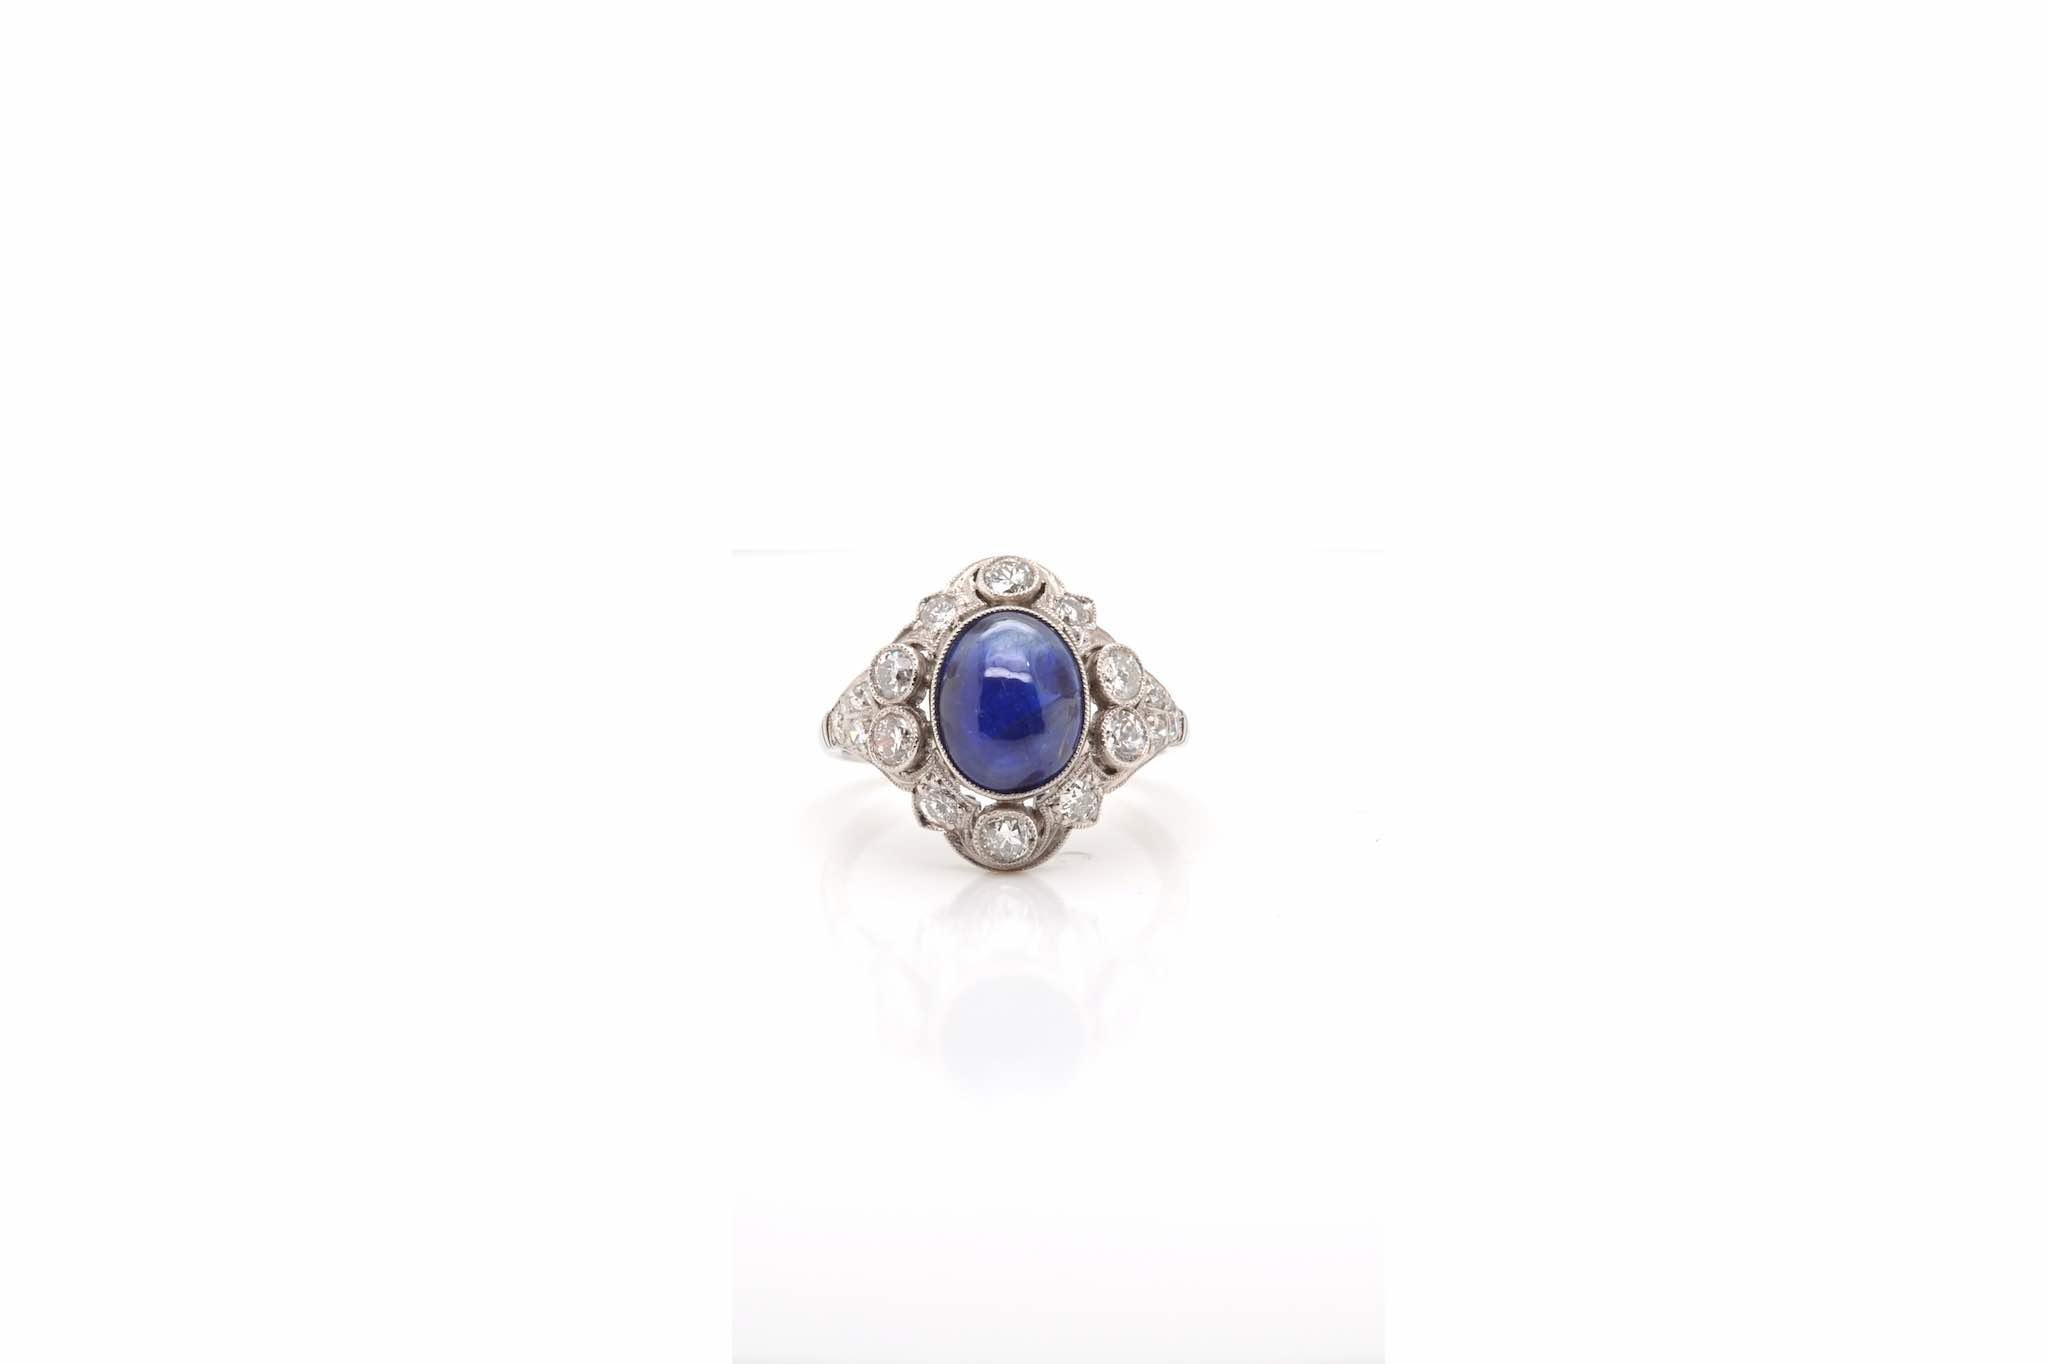 Stones: 3 carats cabochon sapphire and old-cut diamonds
for a total weight of 0.60 carat.
Material: Platinum
Dimensions: 16mm length on finger
Period: 1930
Weight: 5.3g
Size: 52 (free sizing)
Certificate
Ref. : 24373
